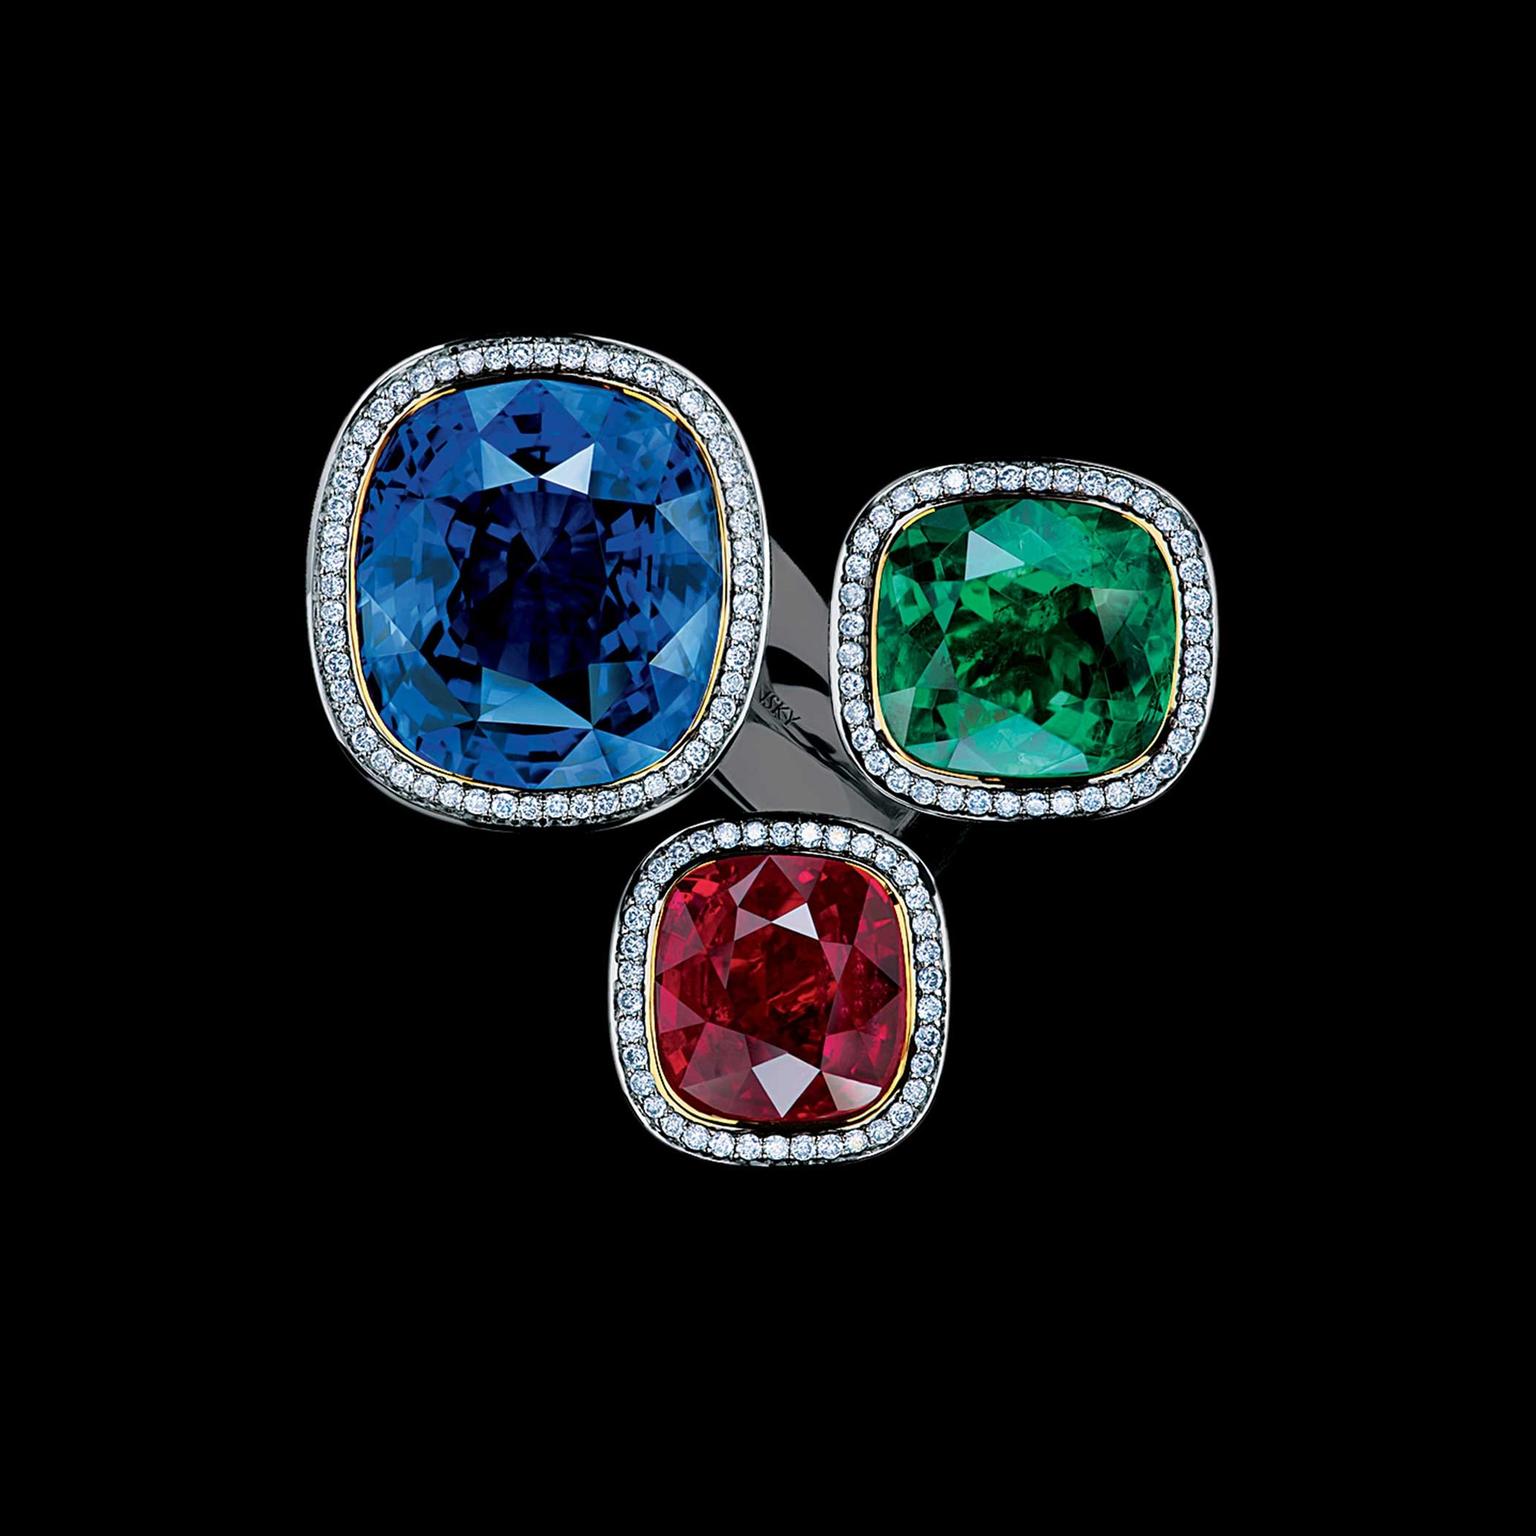 Maxim V Art Stones ring with emerald, ruby and sapphire top view